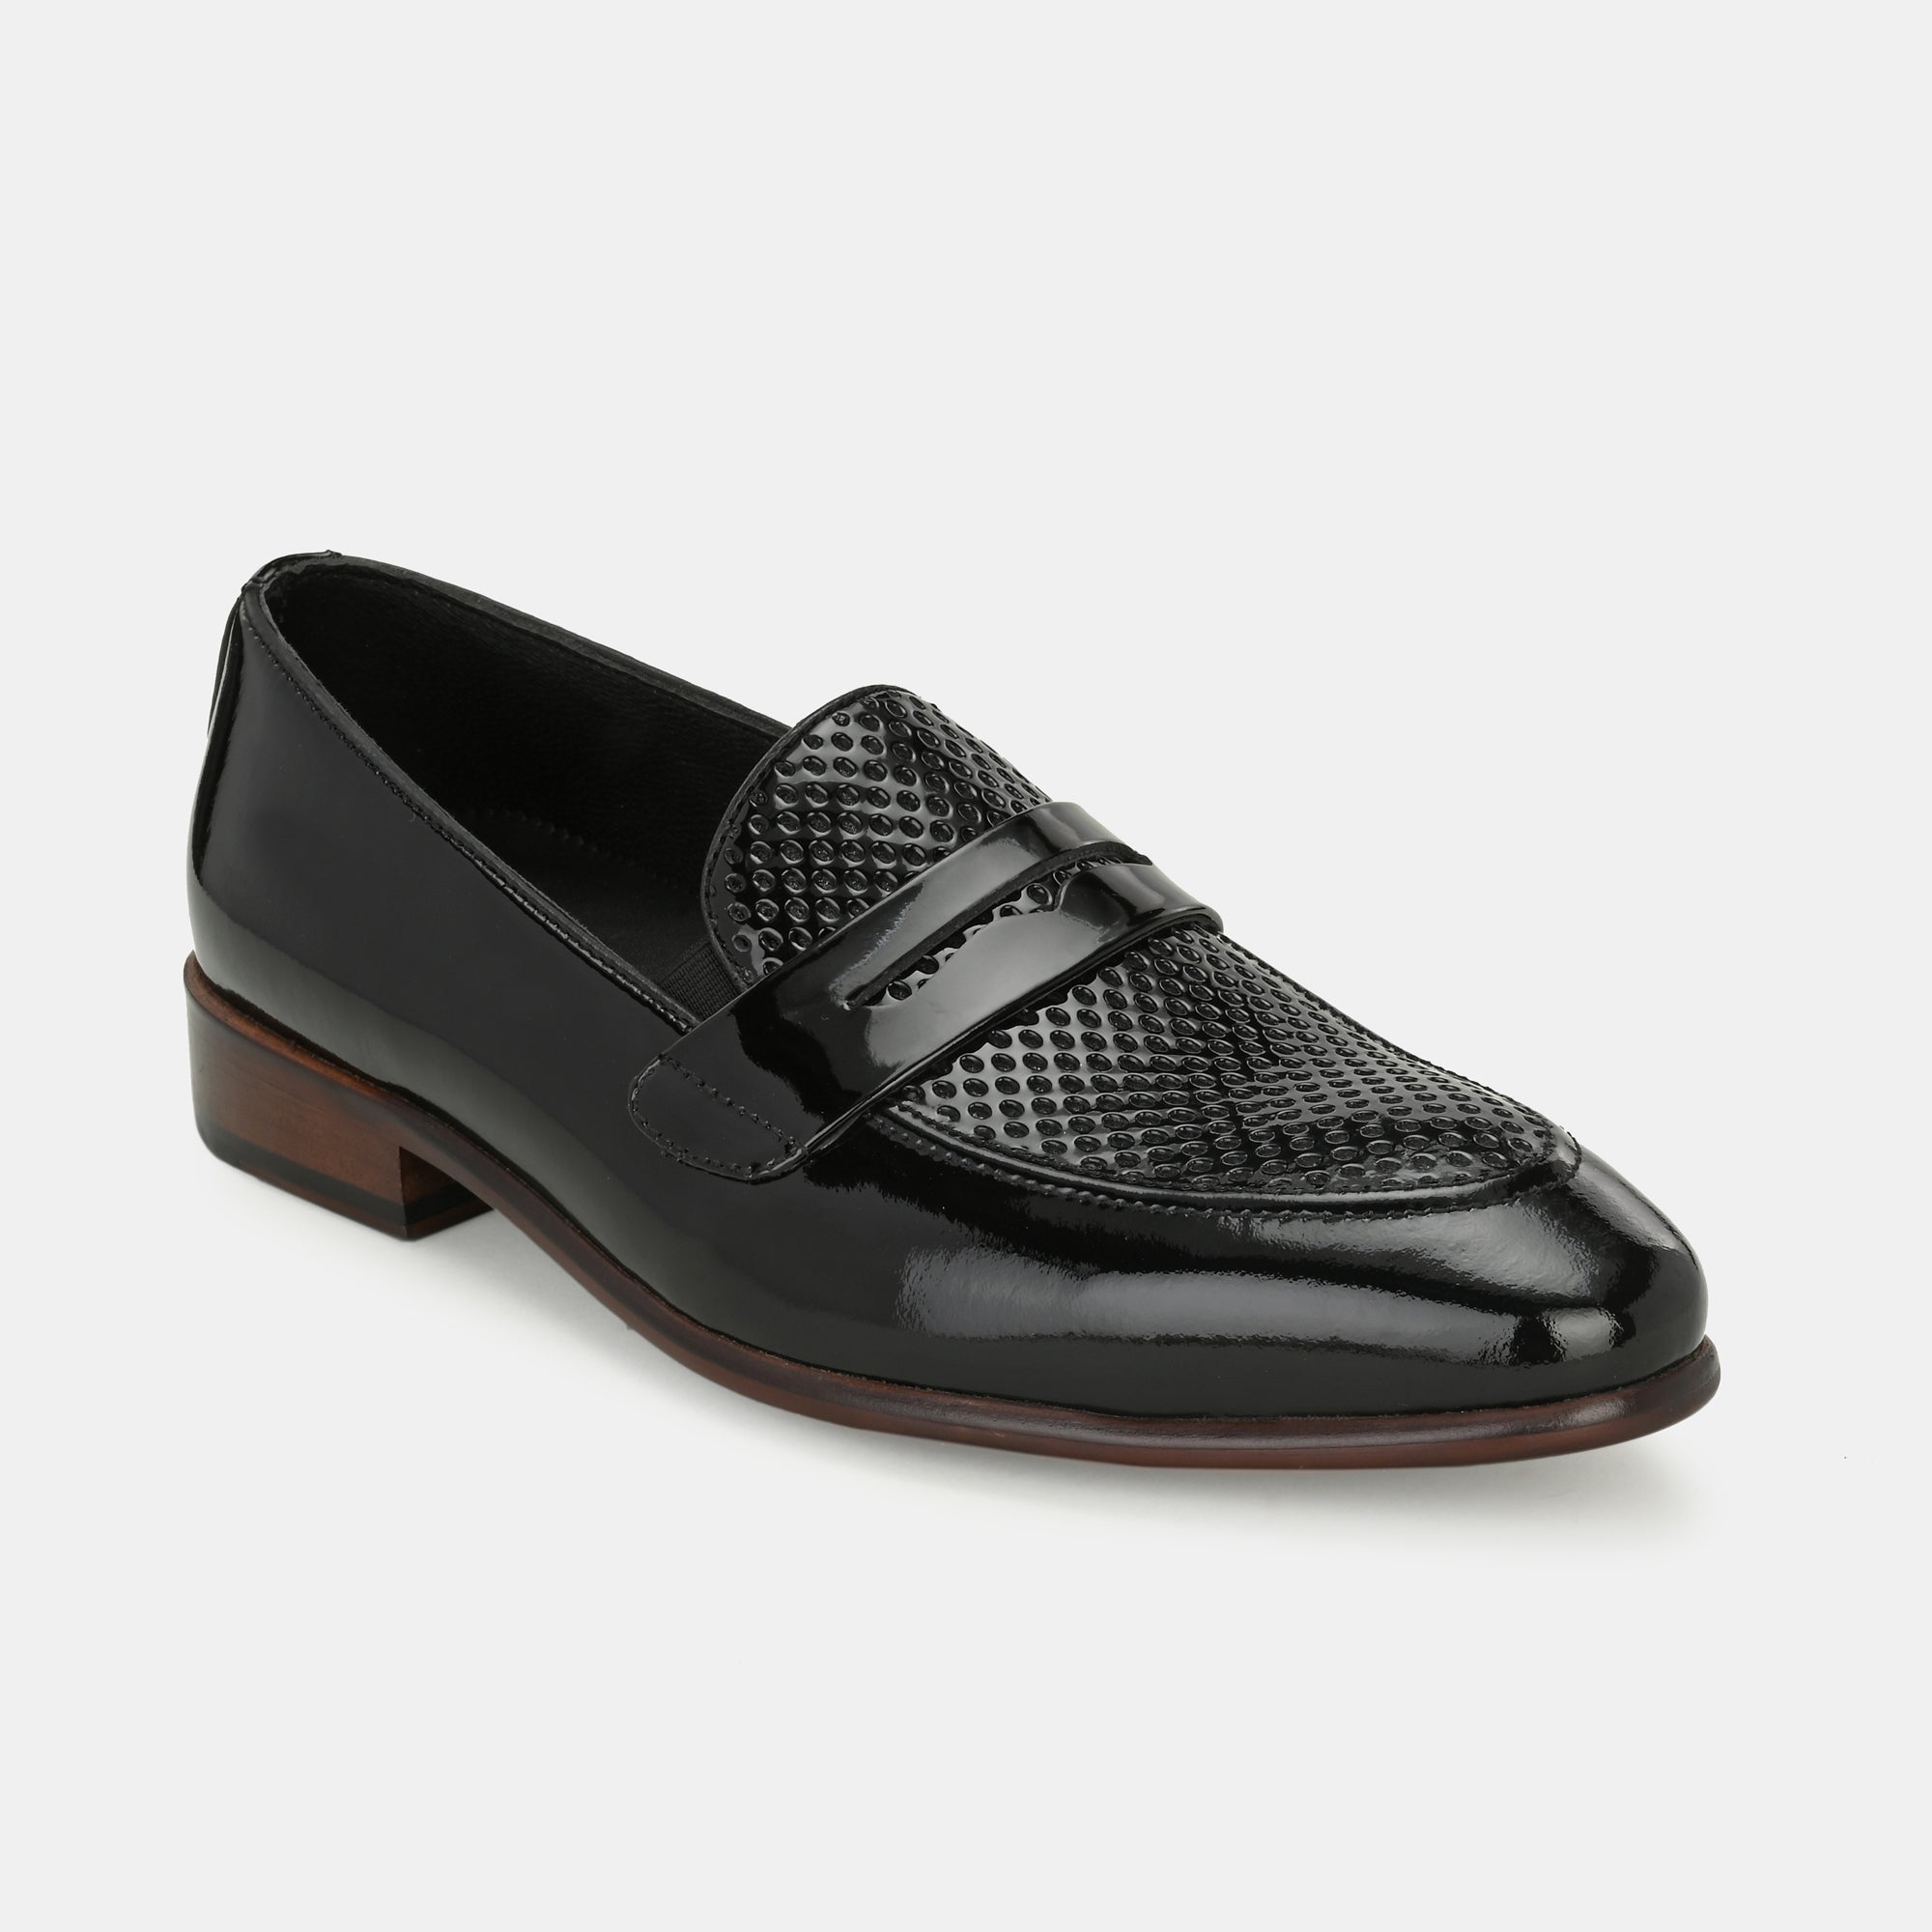 Patent Black Perforated Penny Loafers by Lafattio